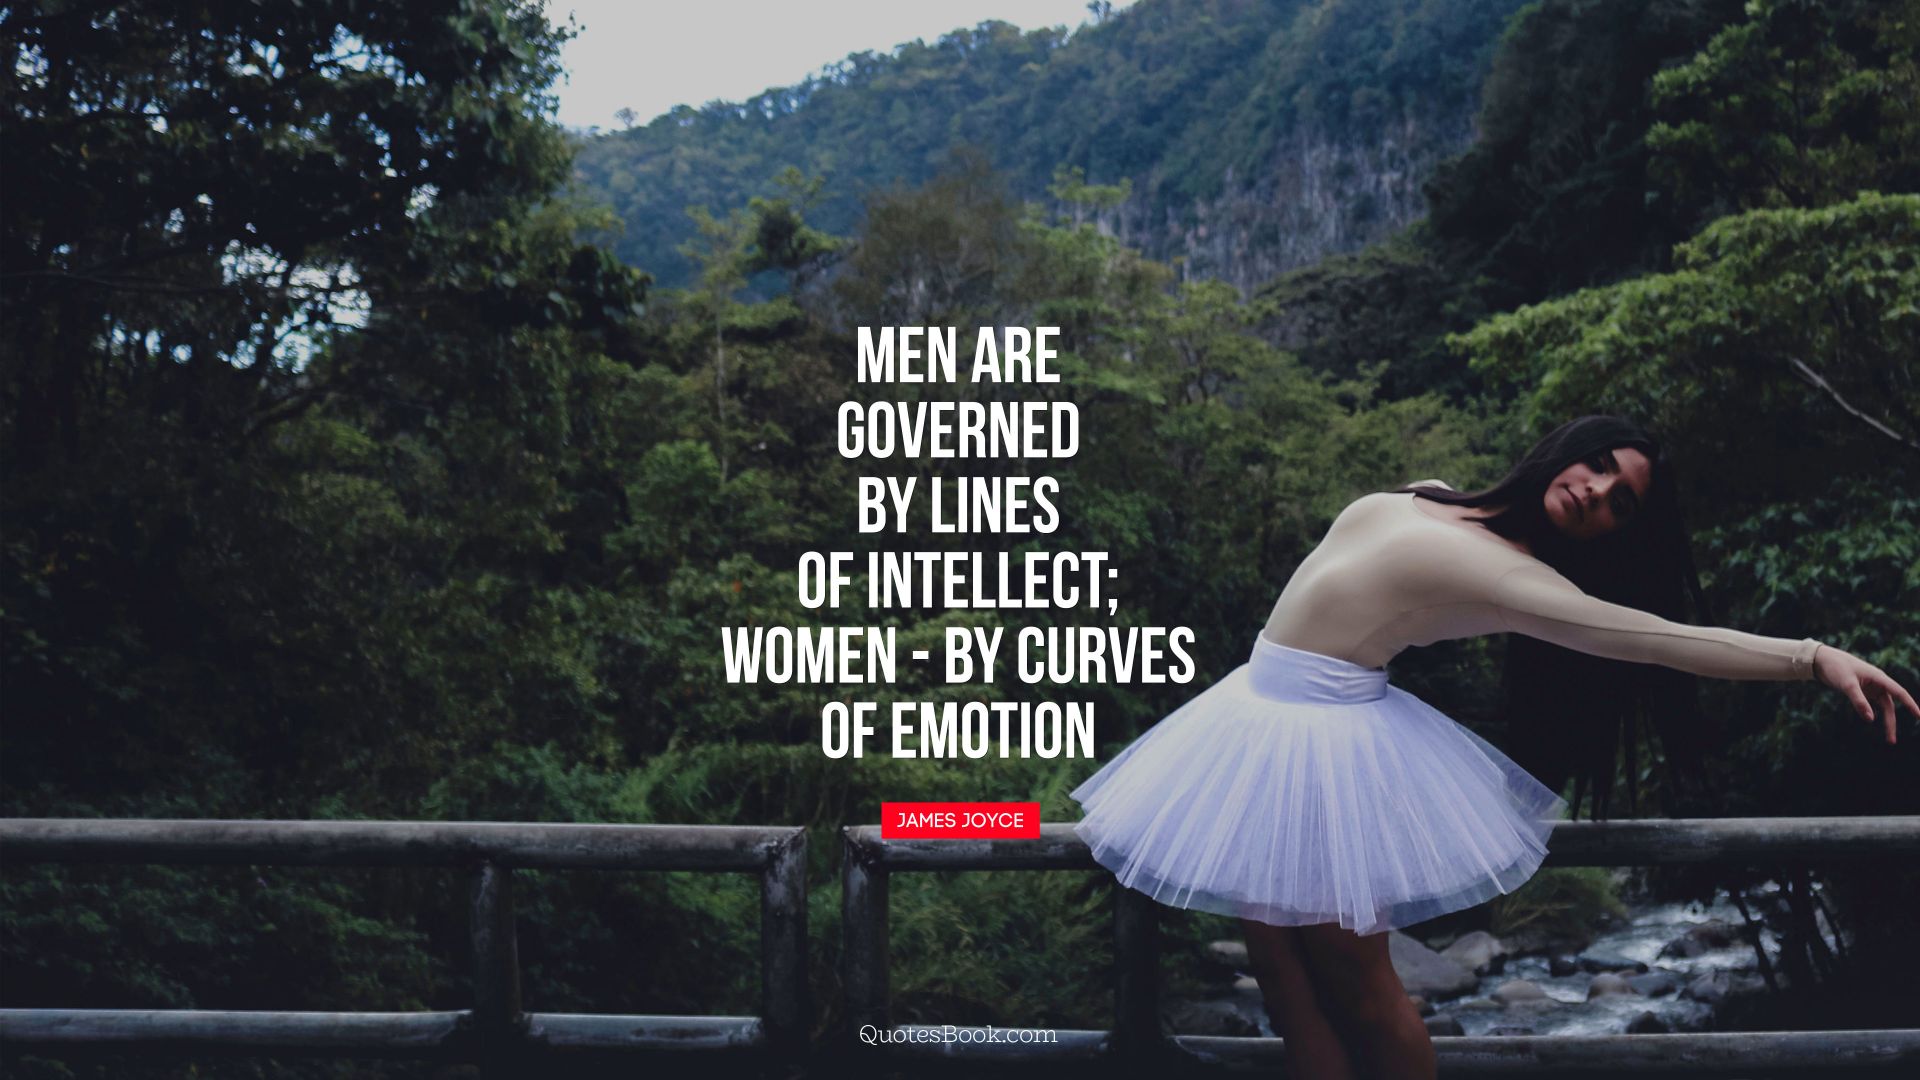 Men are governed by lines of intellect - women: by curves of emotion. - Quote by James Joyce